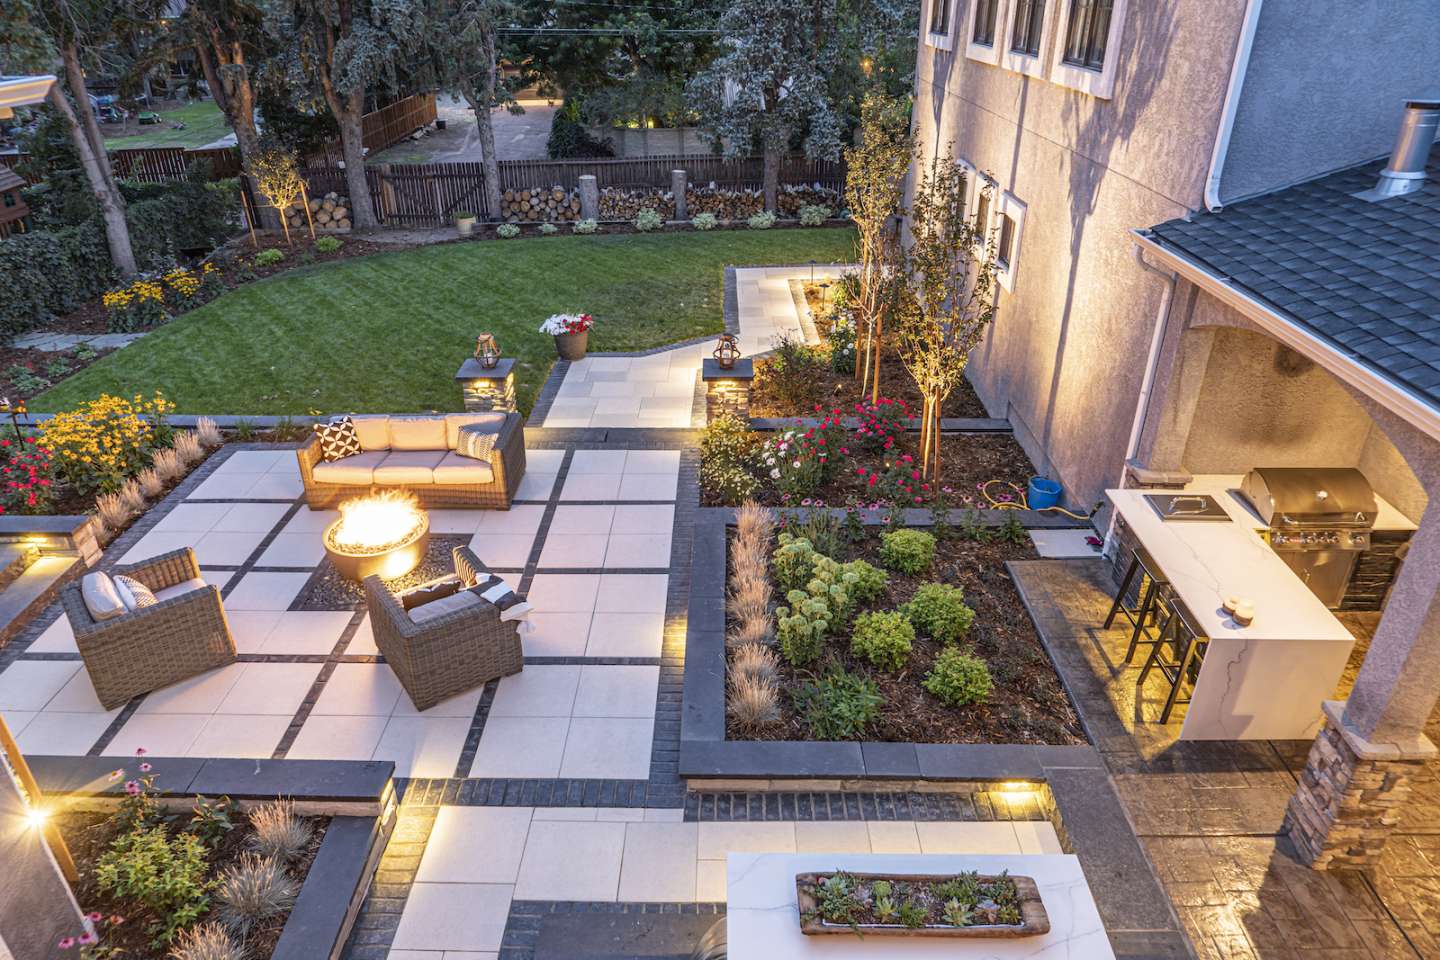 Luxury Landscape Design for Colorado Springs, CO Homeowners